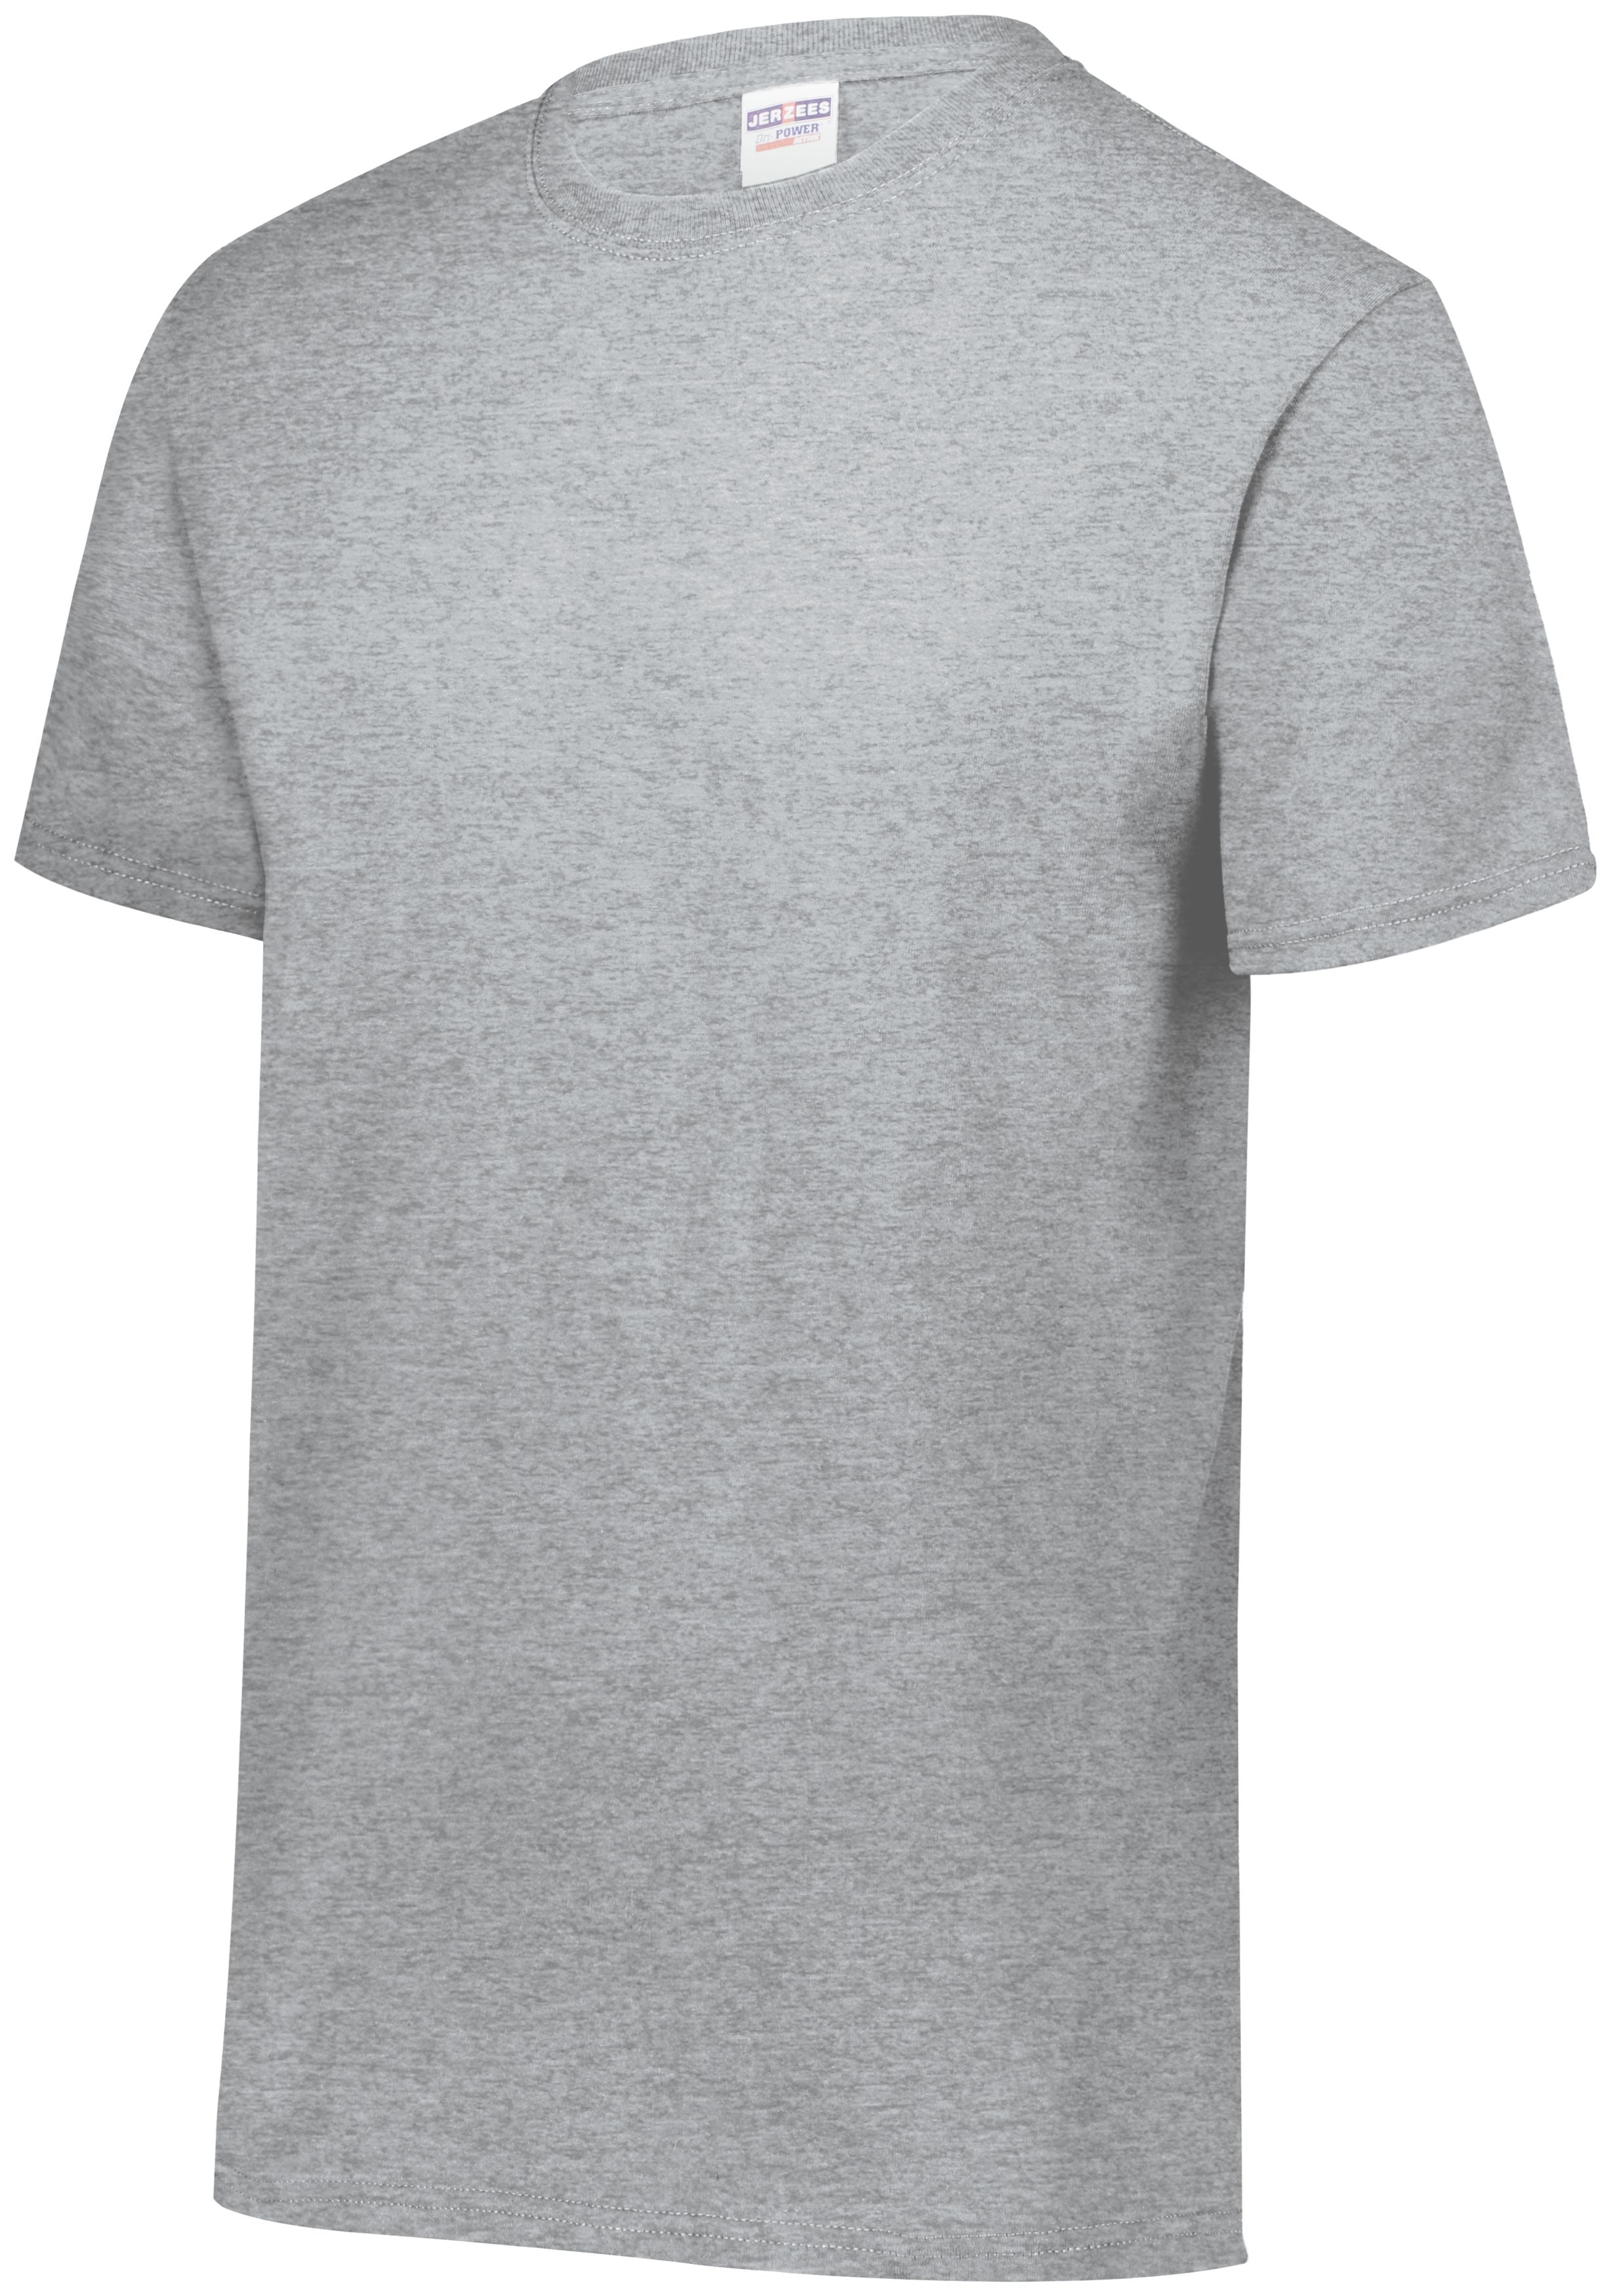 Russell Athletic Youth Dri-power® T-shirt